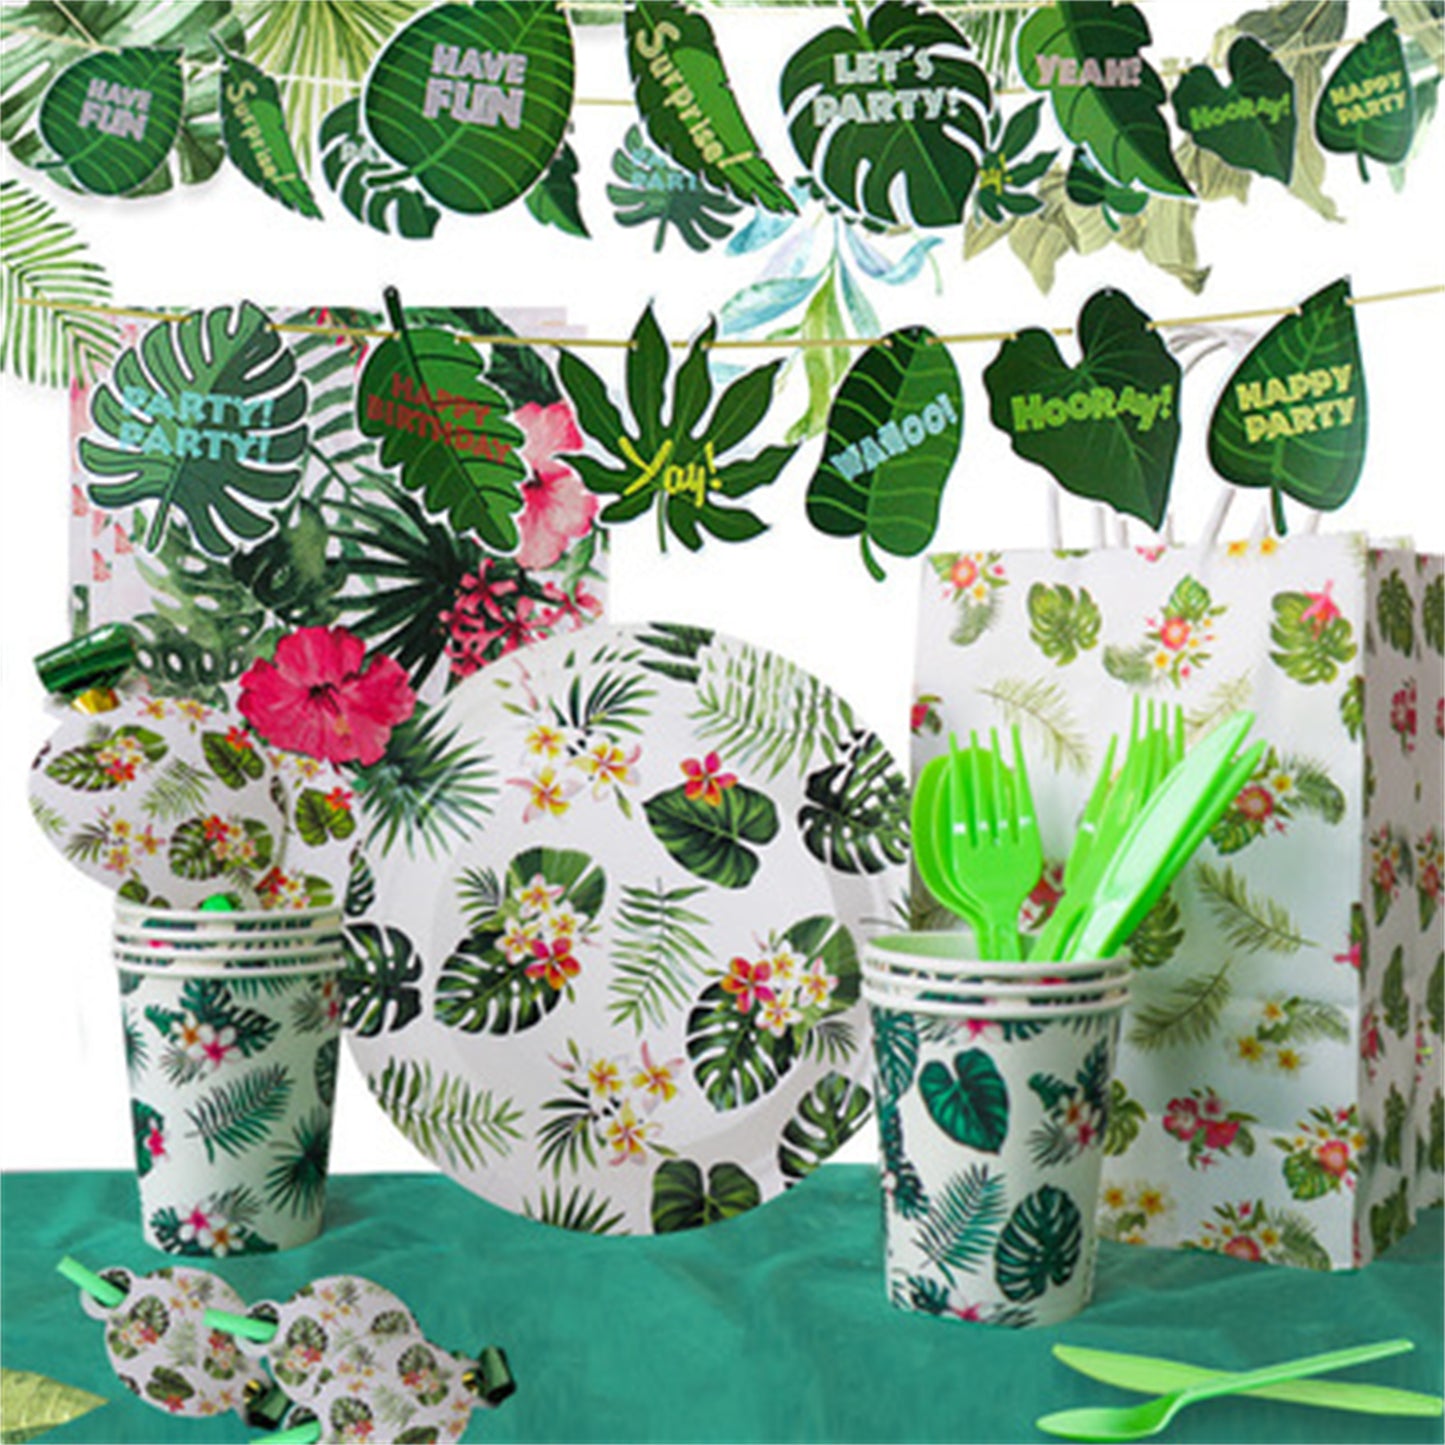 Leaf summer theme paper cup